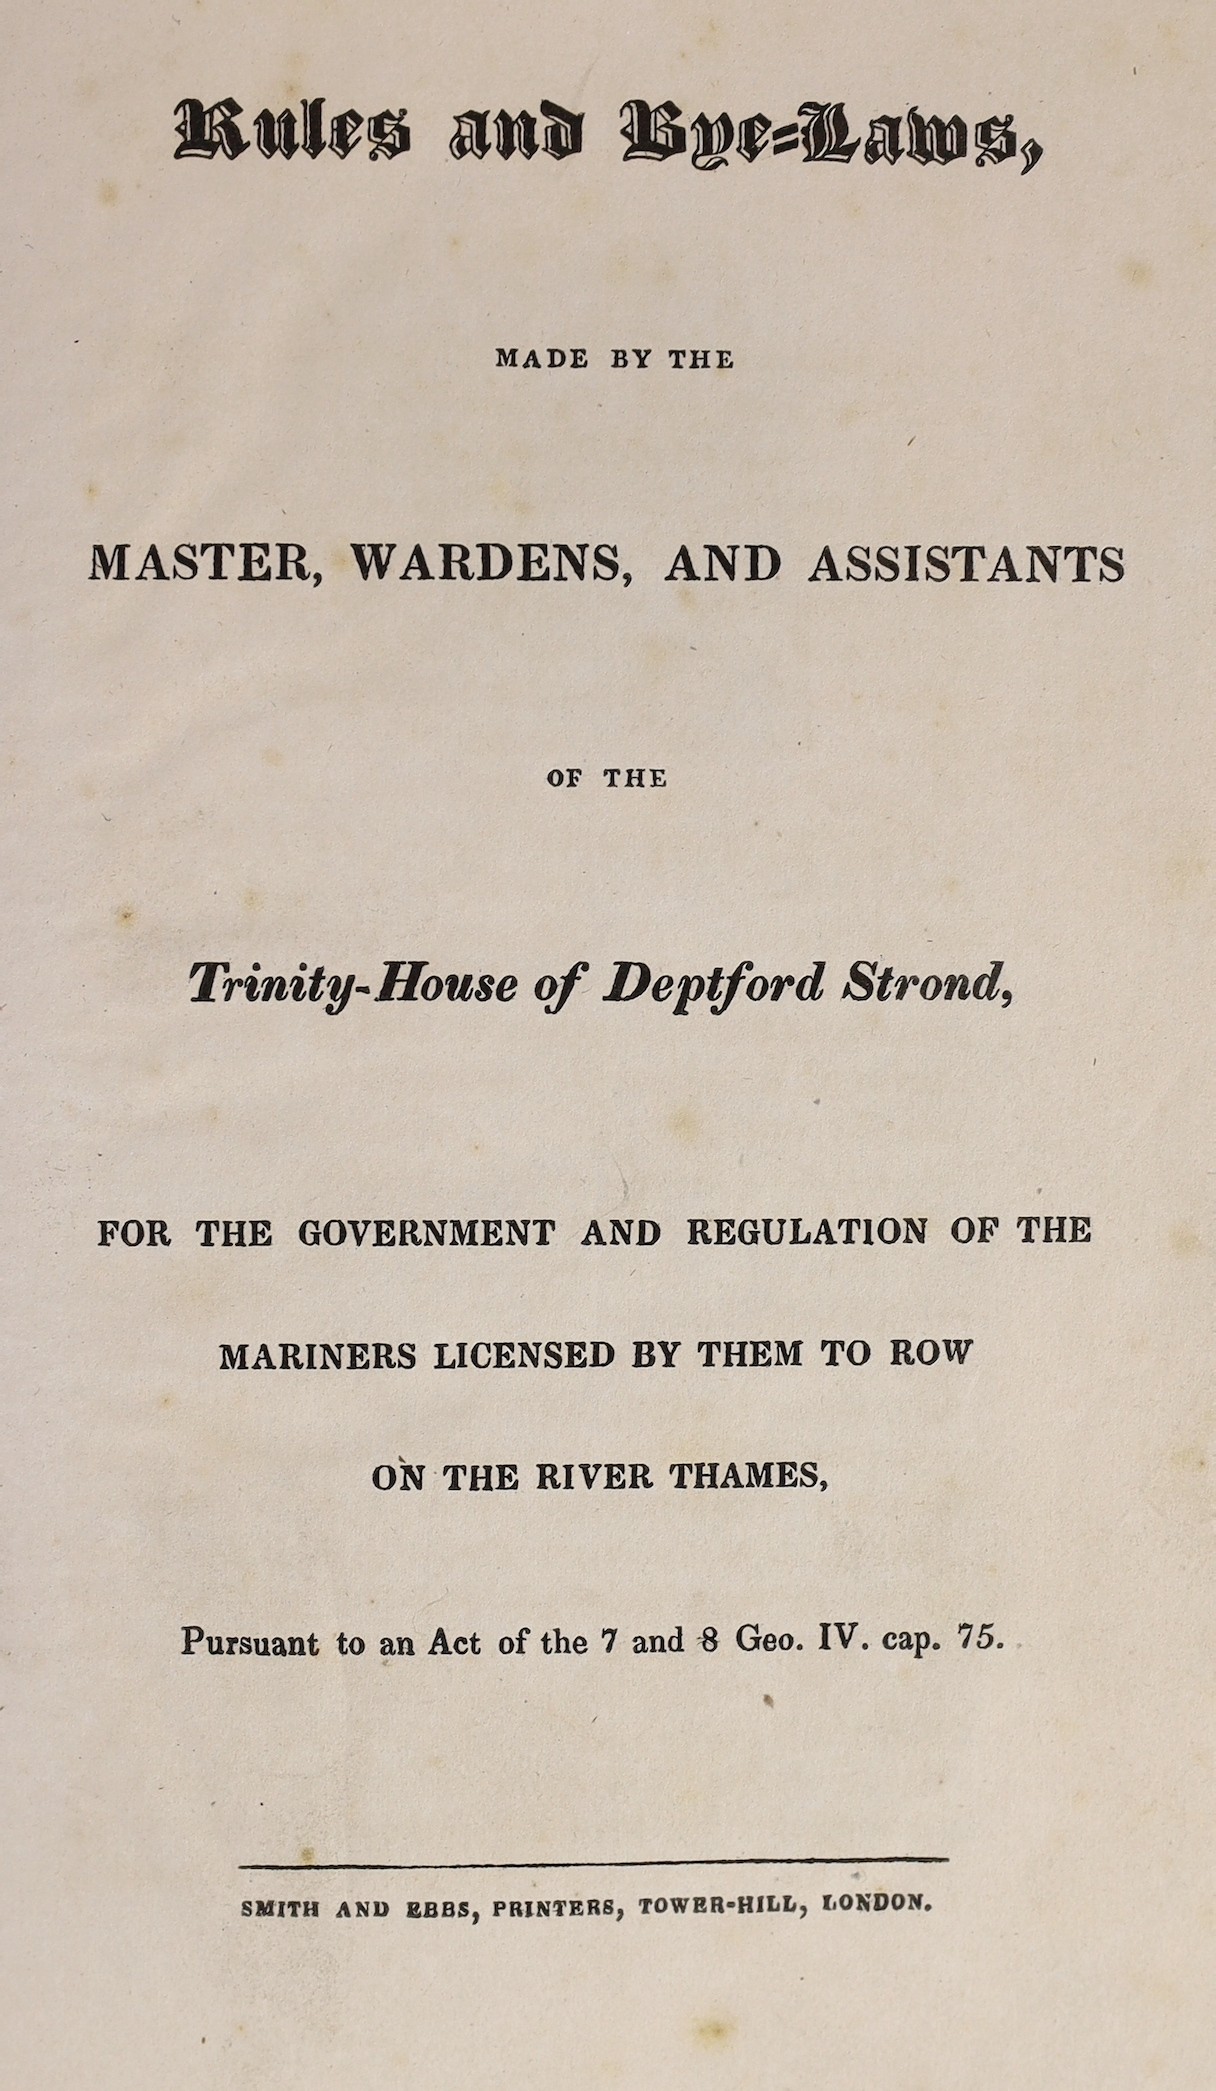 DEPTFORD: (Trinity House) - Rules and Bye-Laws, made by the Master, Wardens, and Assistants of the Trinity-House of Deptford Strond, for the ... regulation of mariners licensed by them to row on the River Thames ... head